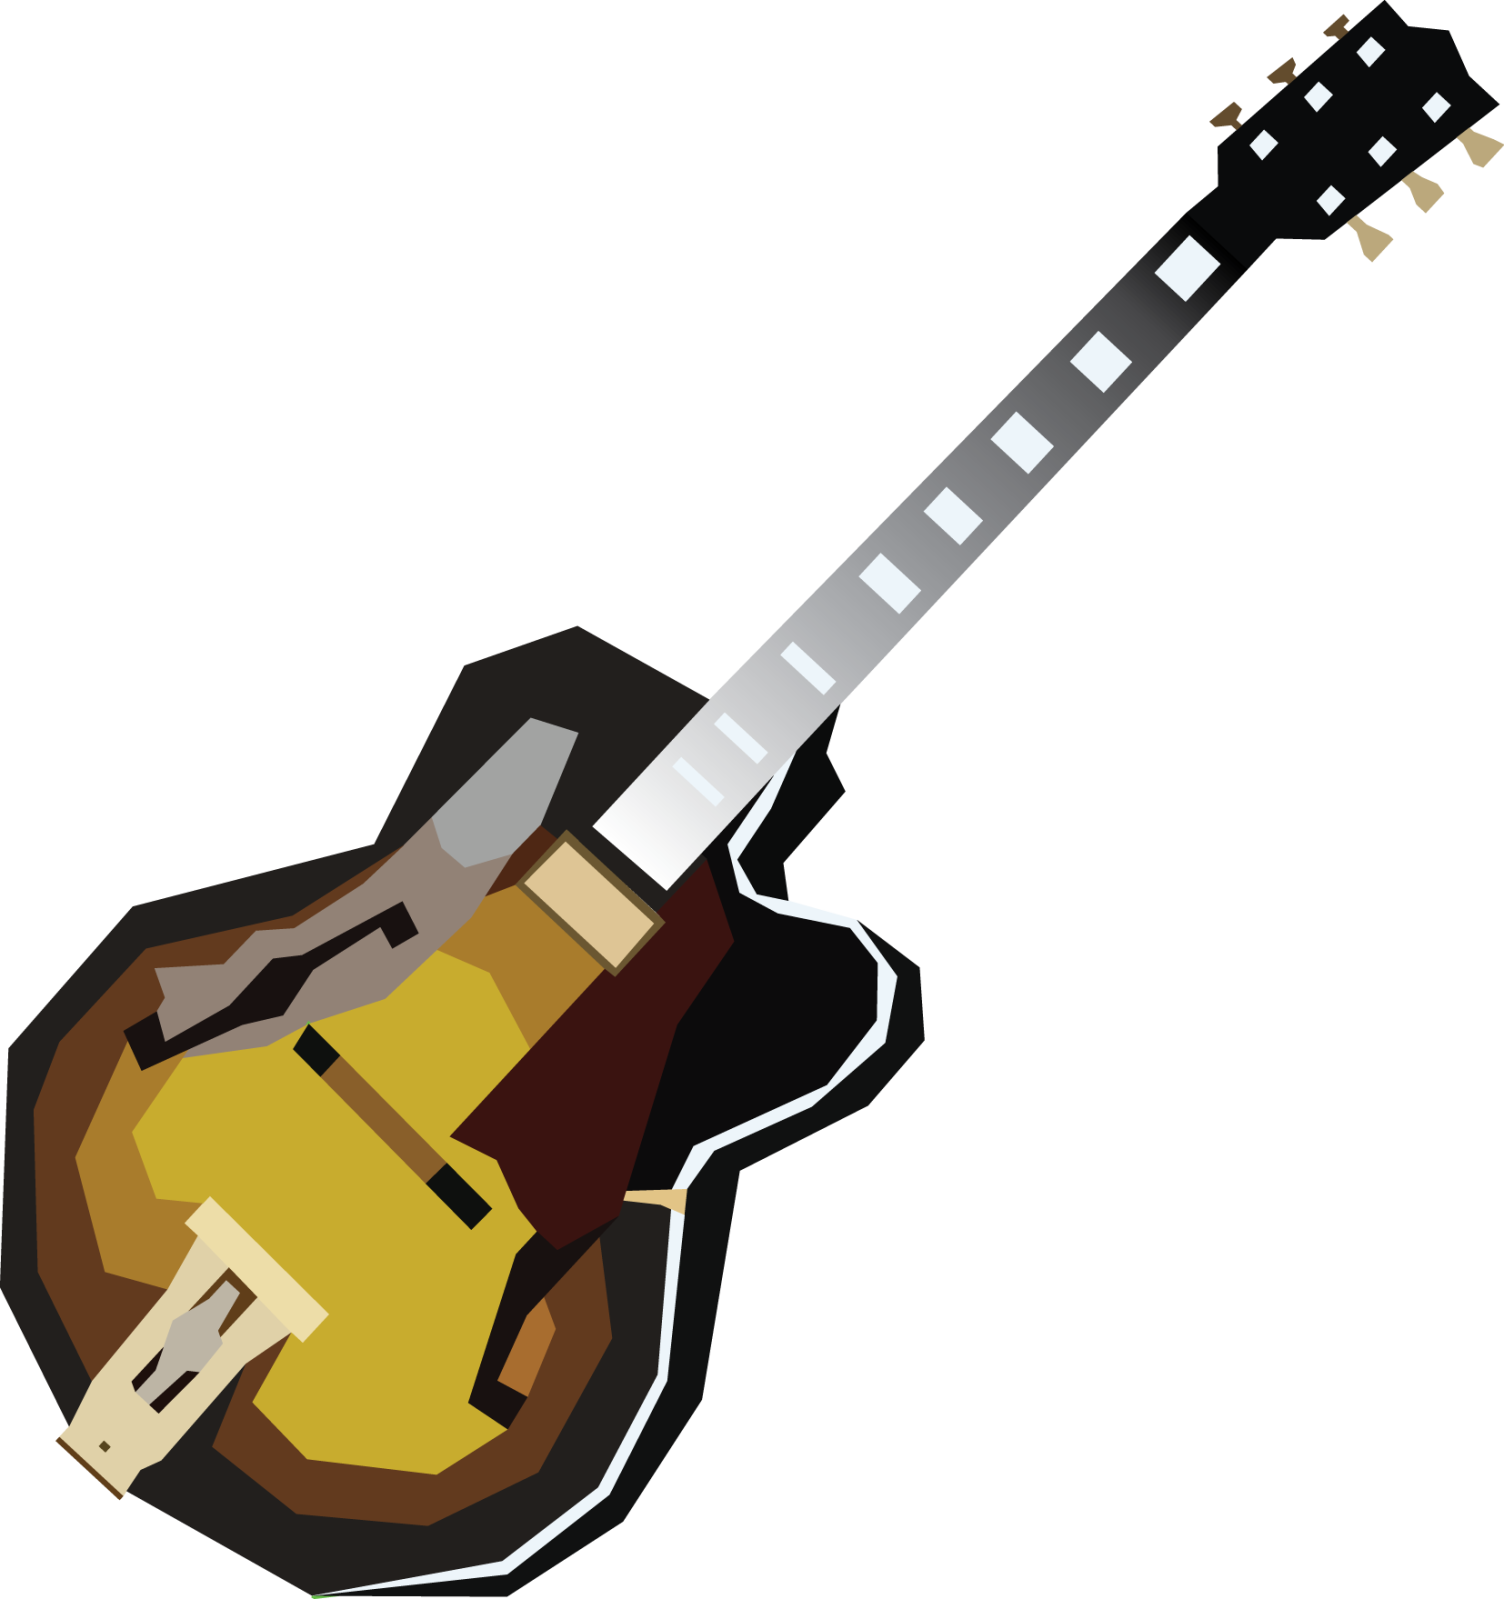 Poly Vector Art [reopened] - Gibson Les Paul Studio 70s Tribute (1504x1599)